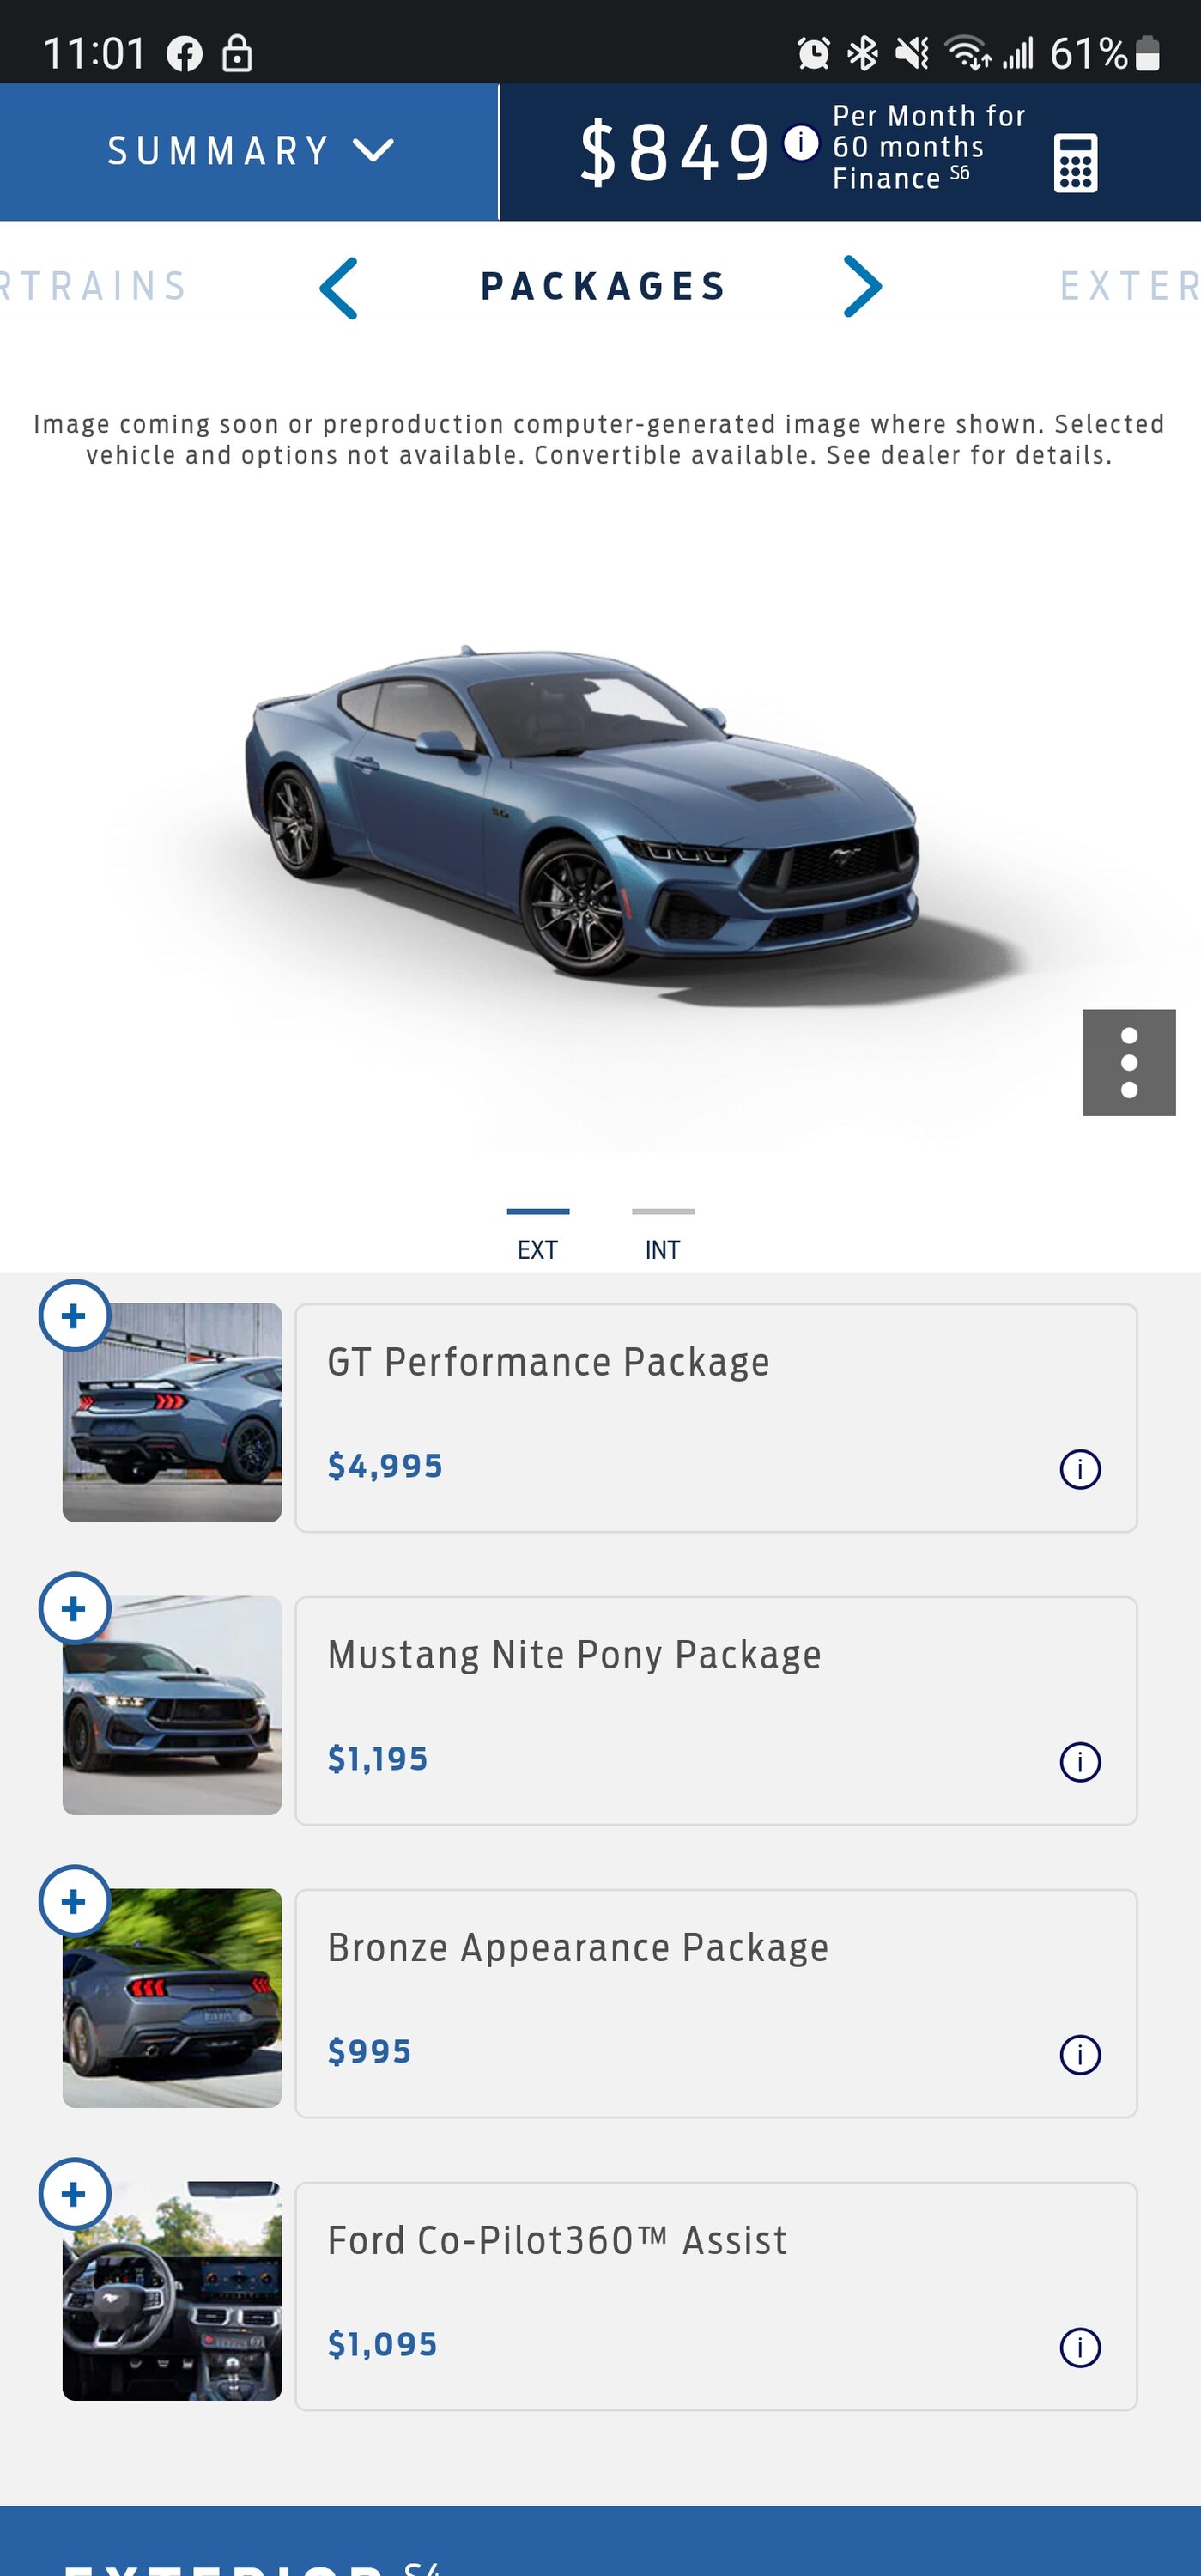 S650 Mustang Build and Price updated? More photos of options and better feature descriptions now Screenshot_20230415_230131_Chrome